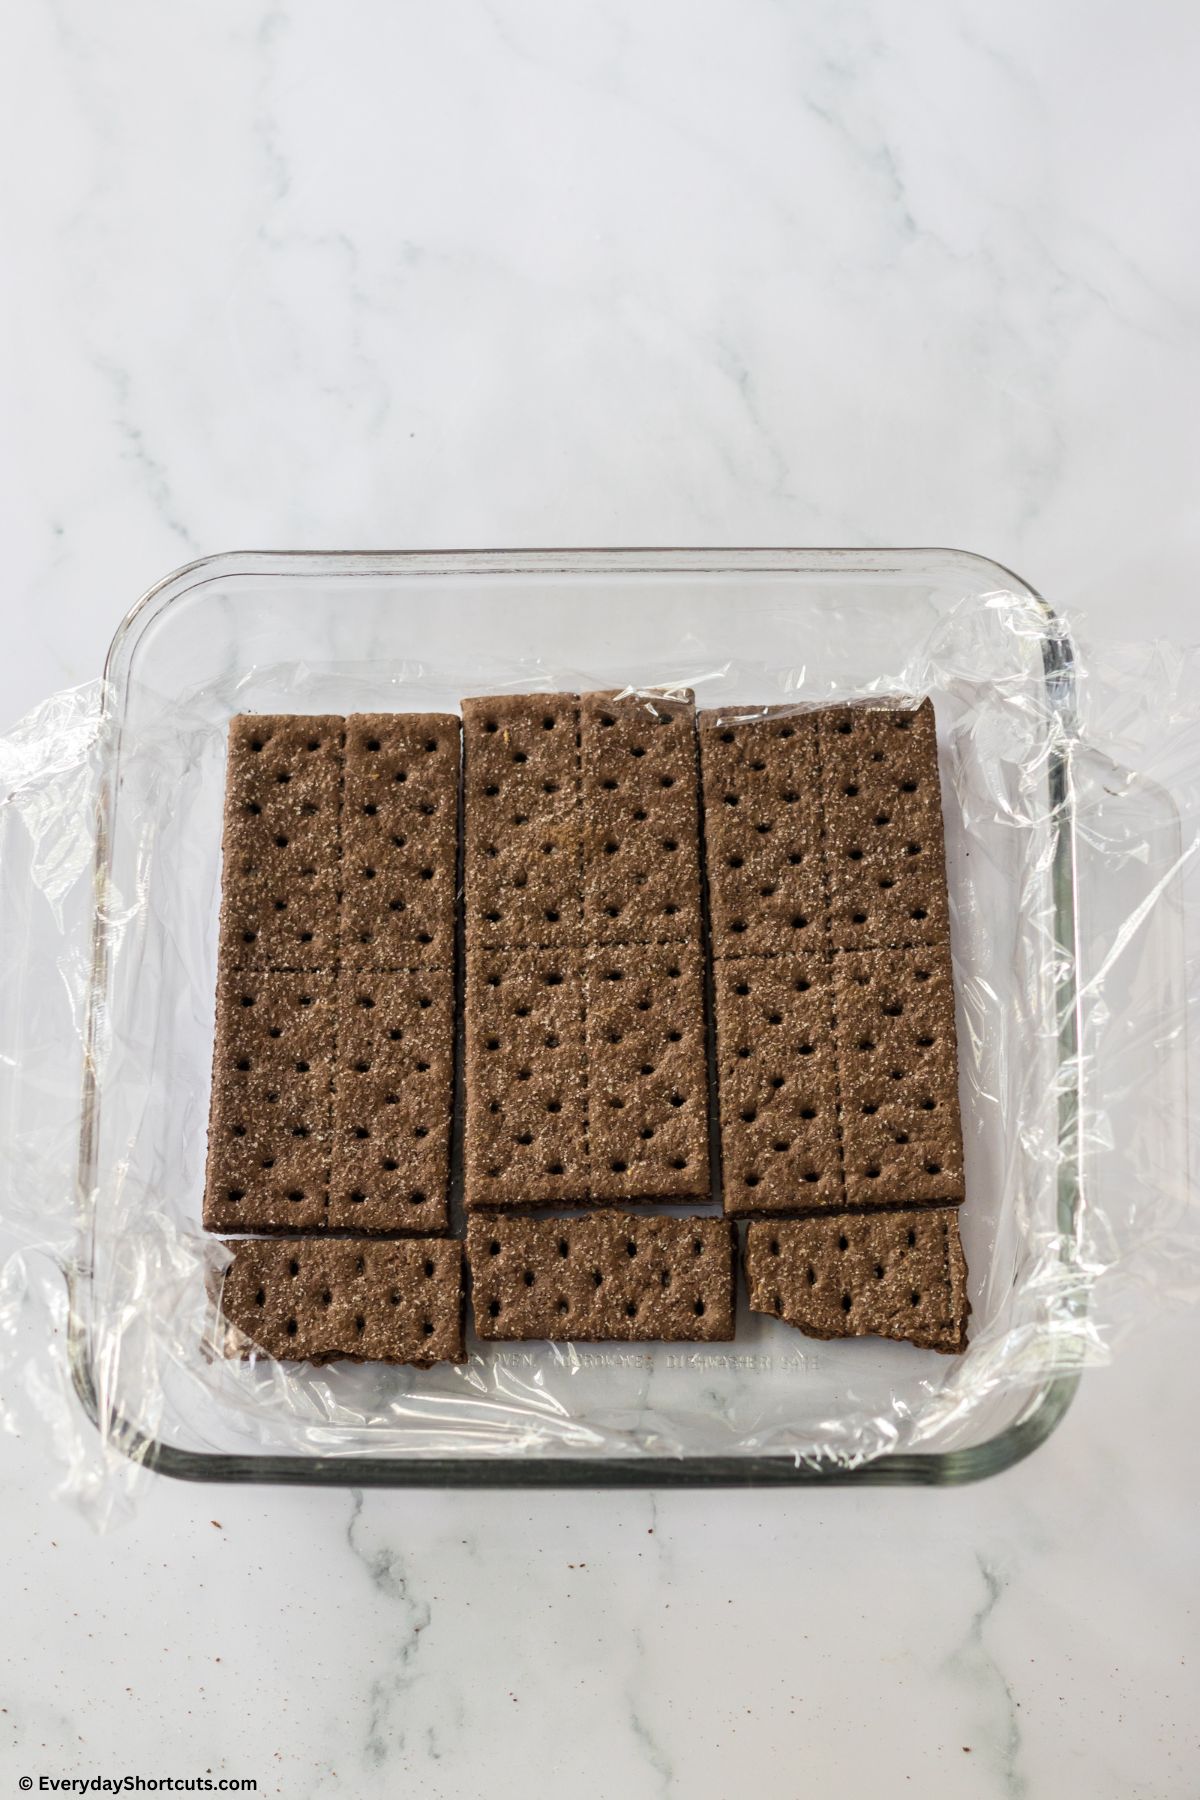 layer of chocolate graham crackers in a baking dish